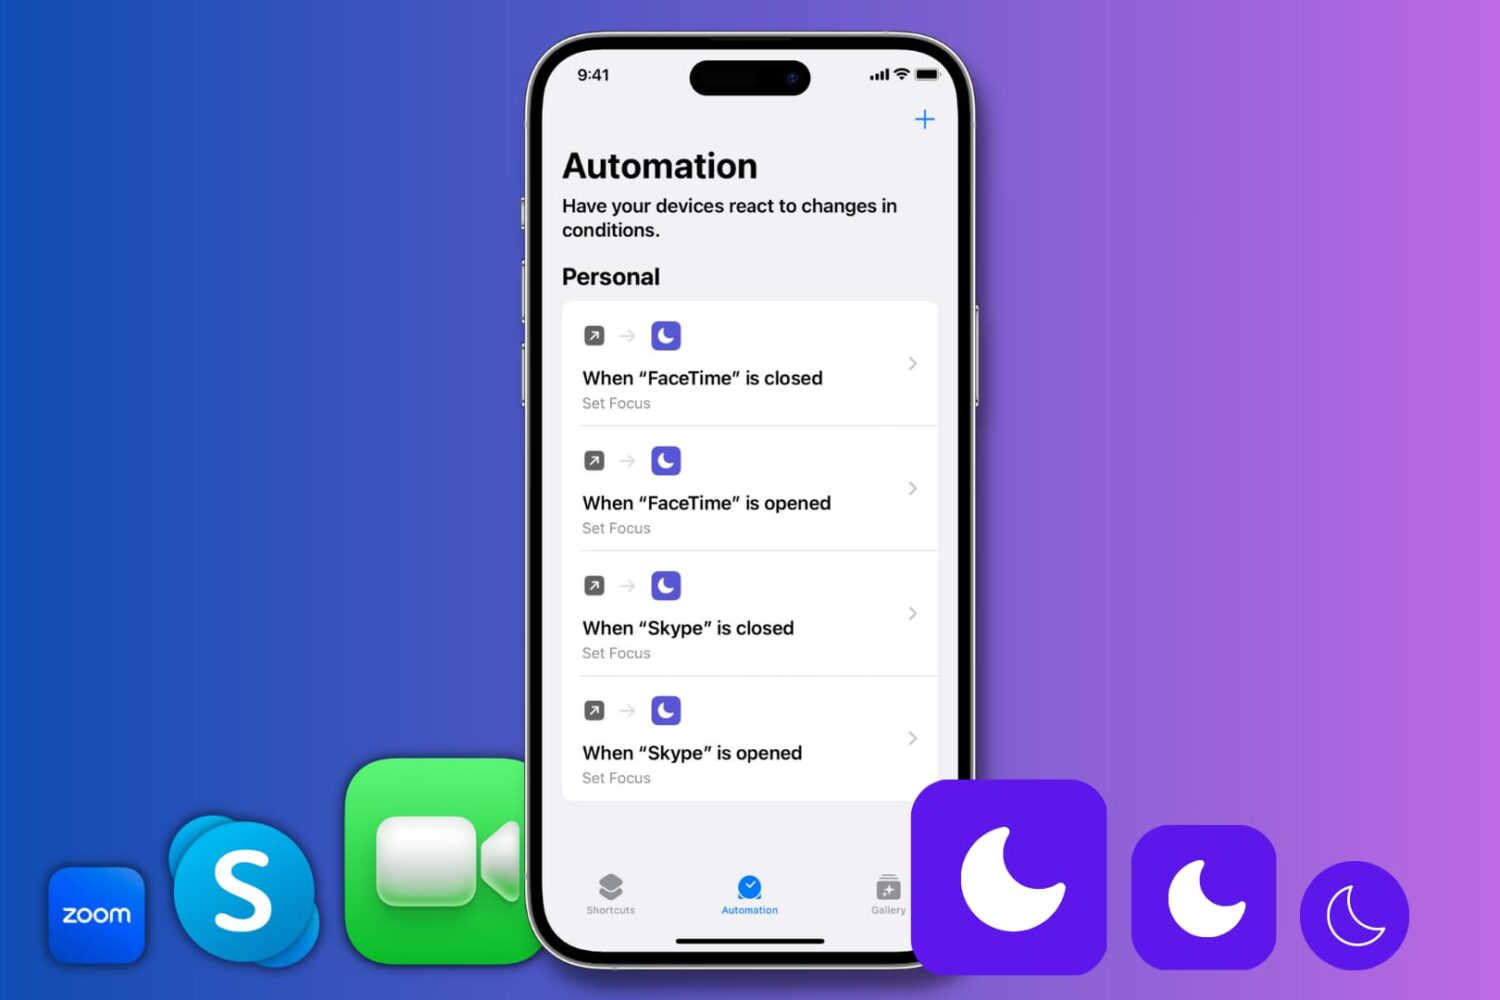 Automation to automatically enable and disable DND when you open or close FaceTime or Skype on iPhone